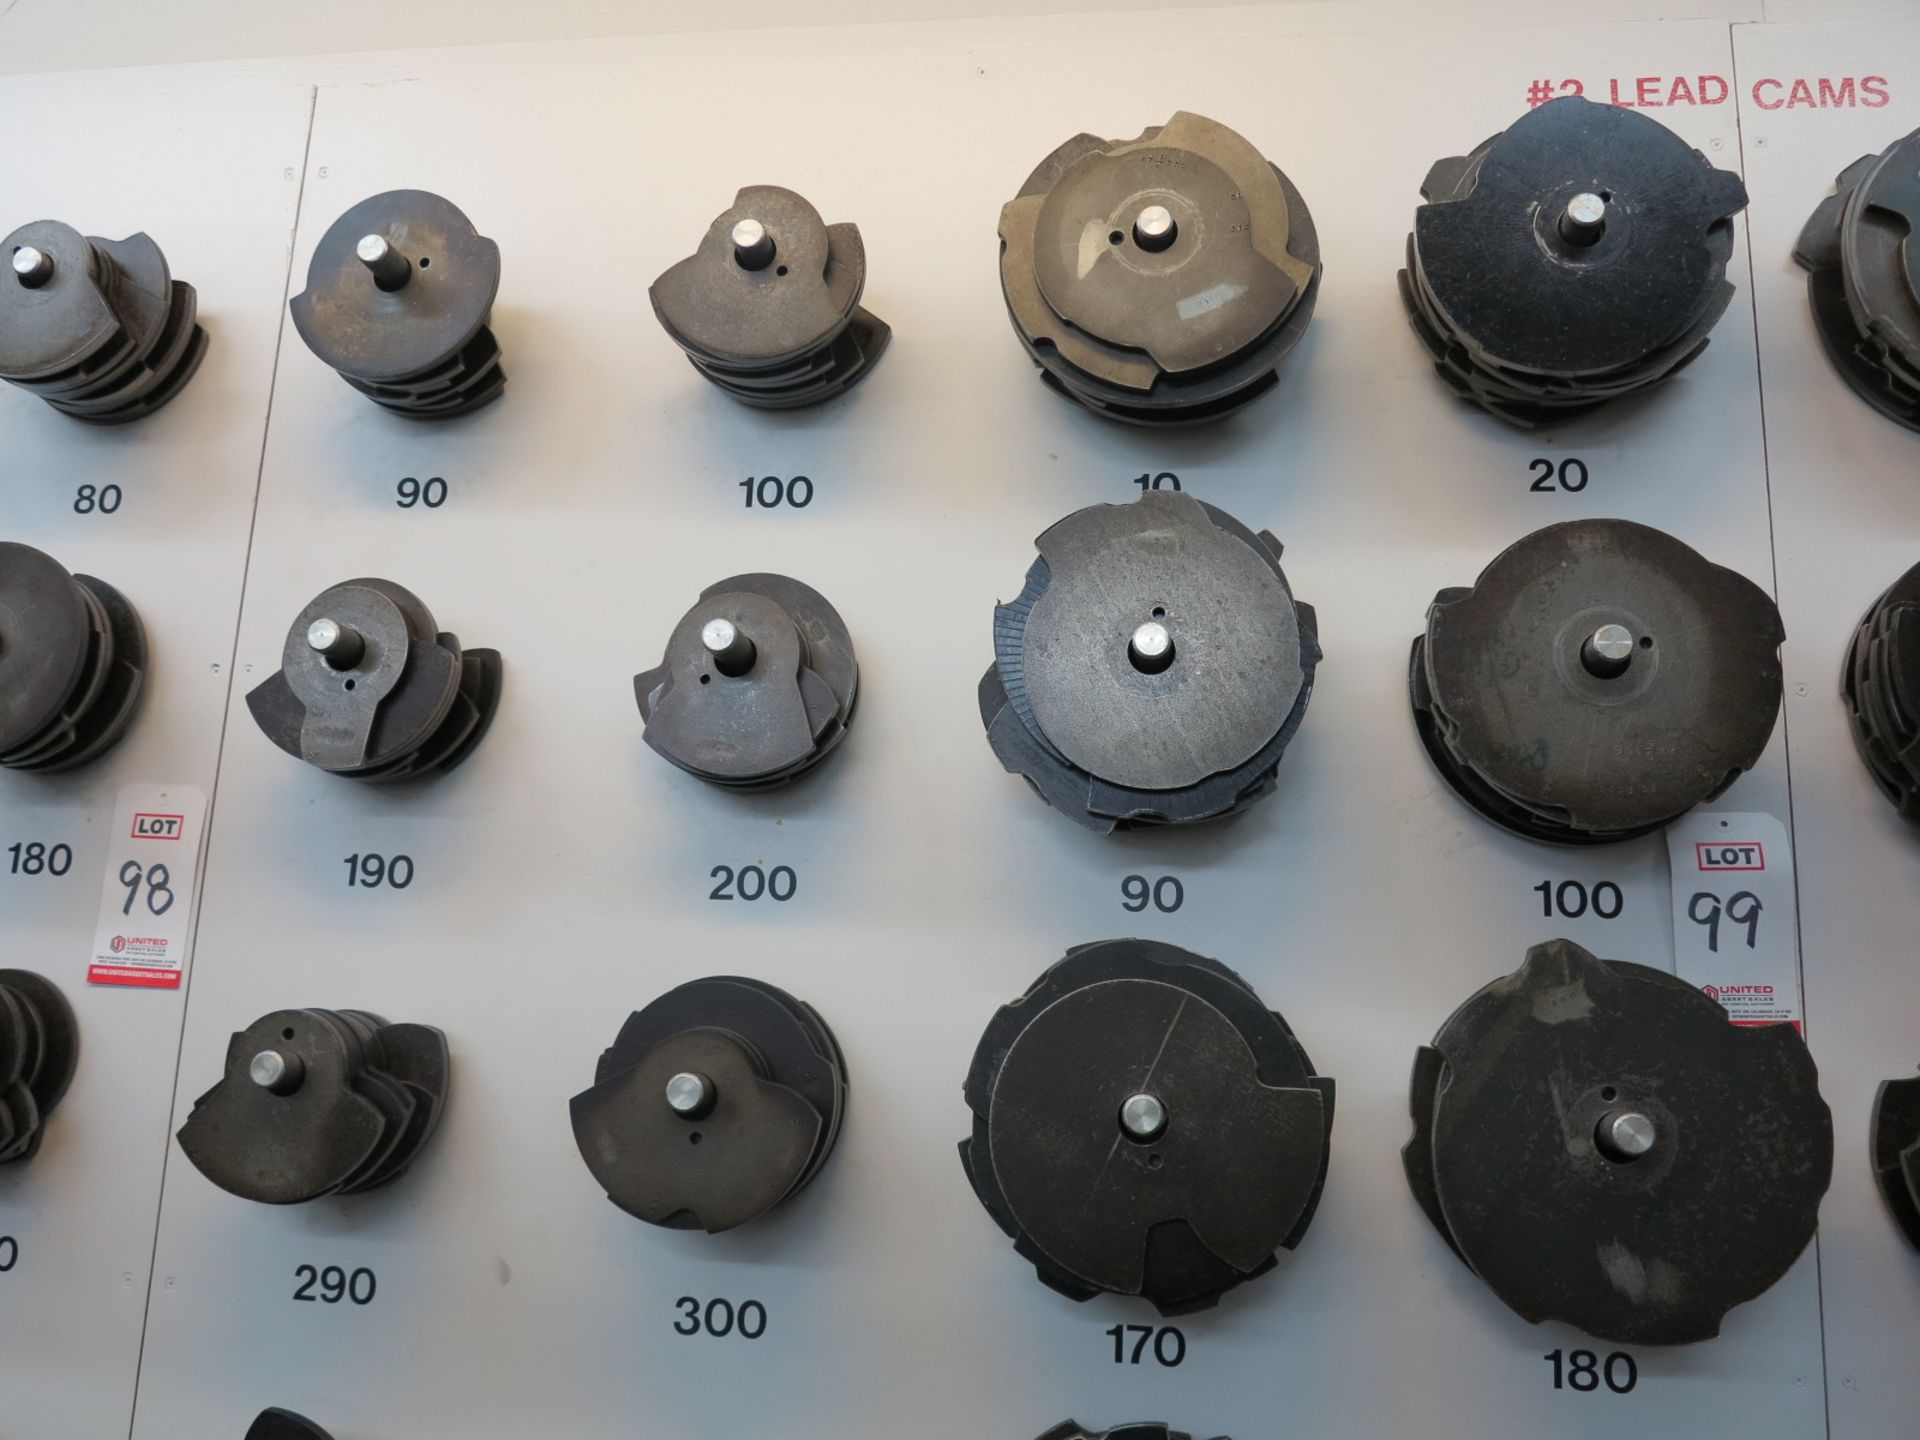 LOT - LARGE QUANTITY OF #2 LEAD CAMS